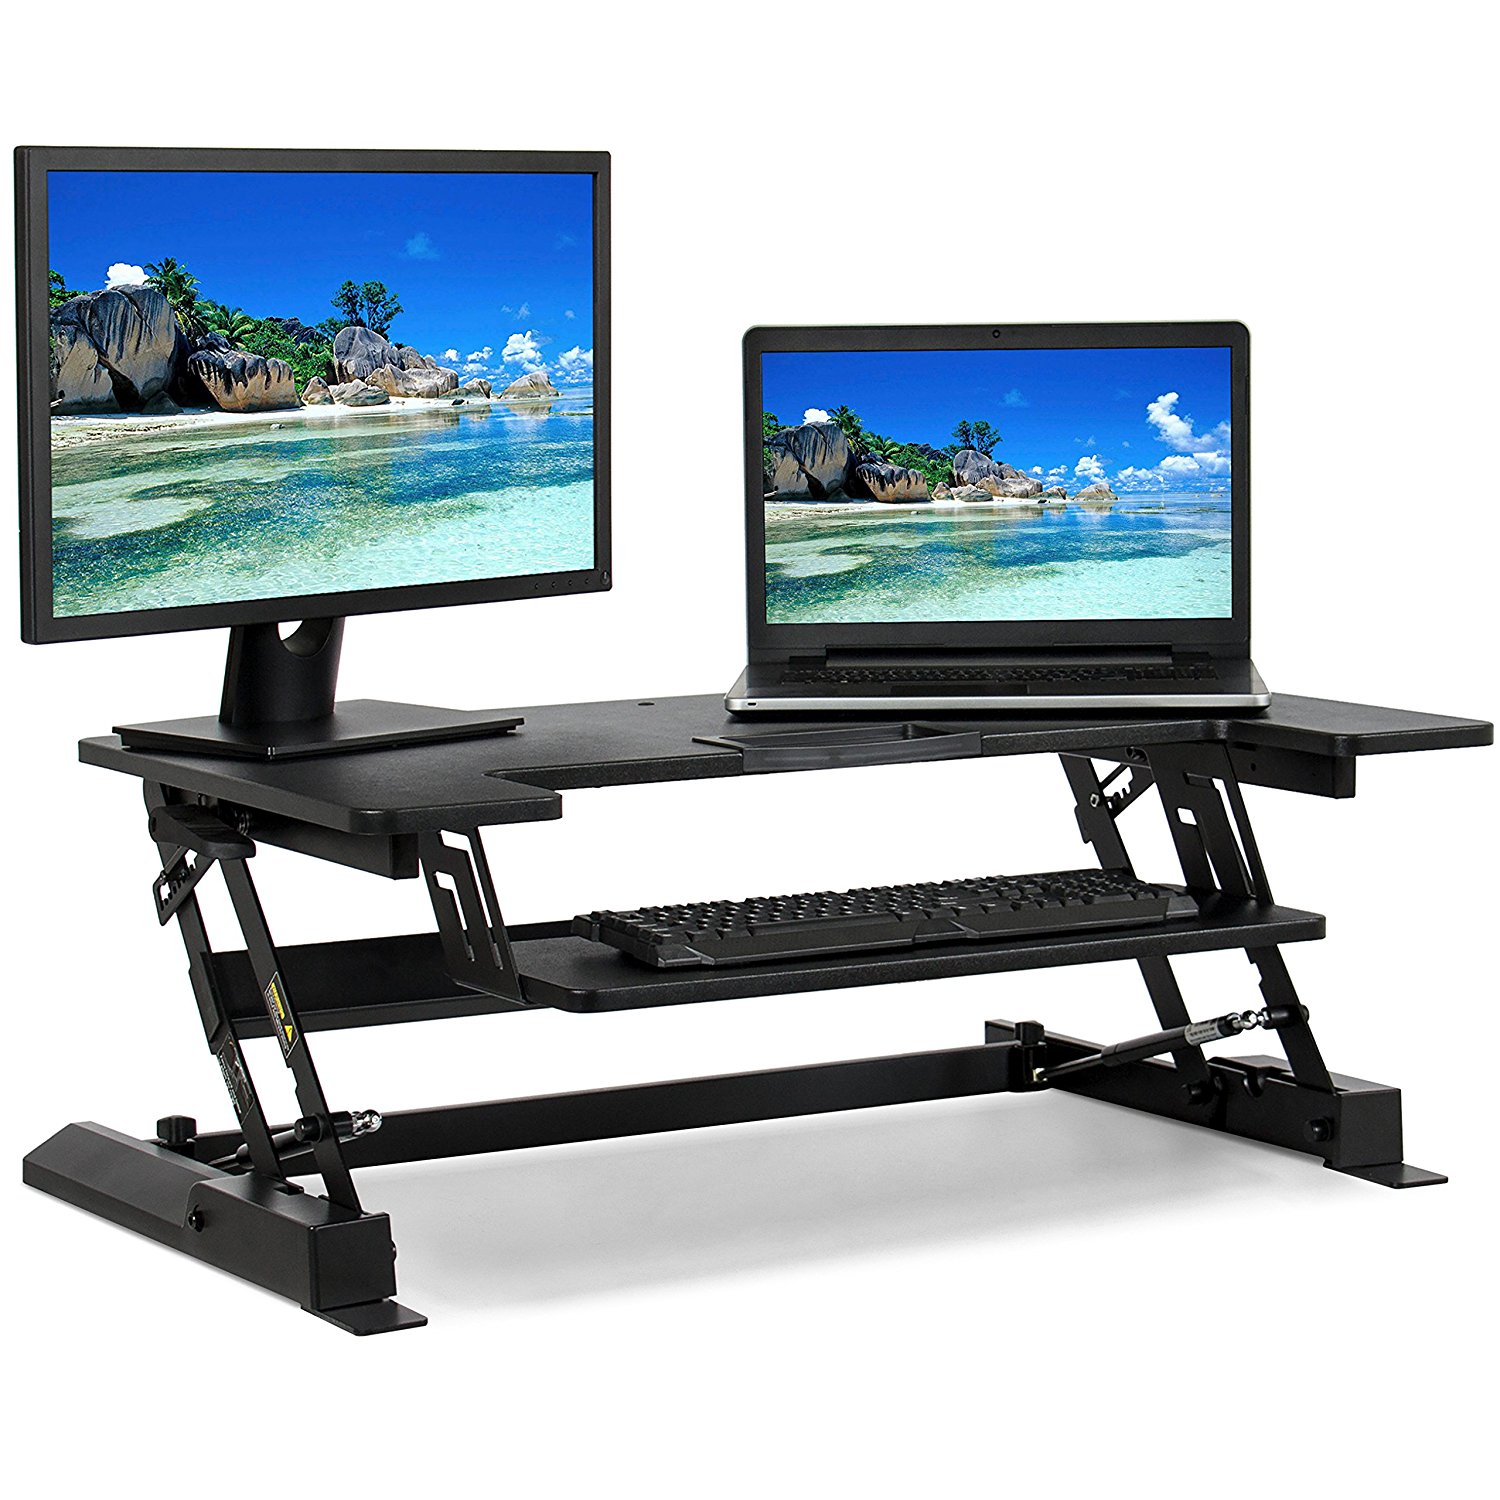 Review of Best Choice Products 36in Height Adjustable Standing Tabletop Desk Sit to Stand Workstation